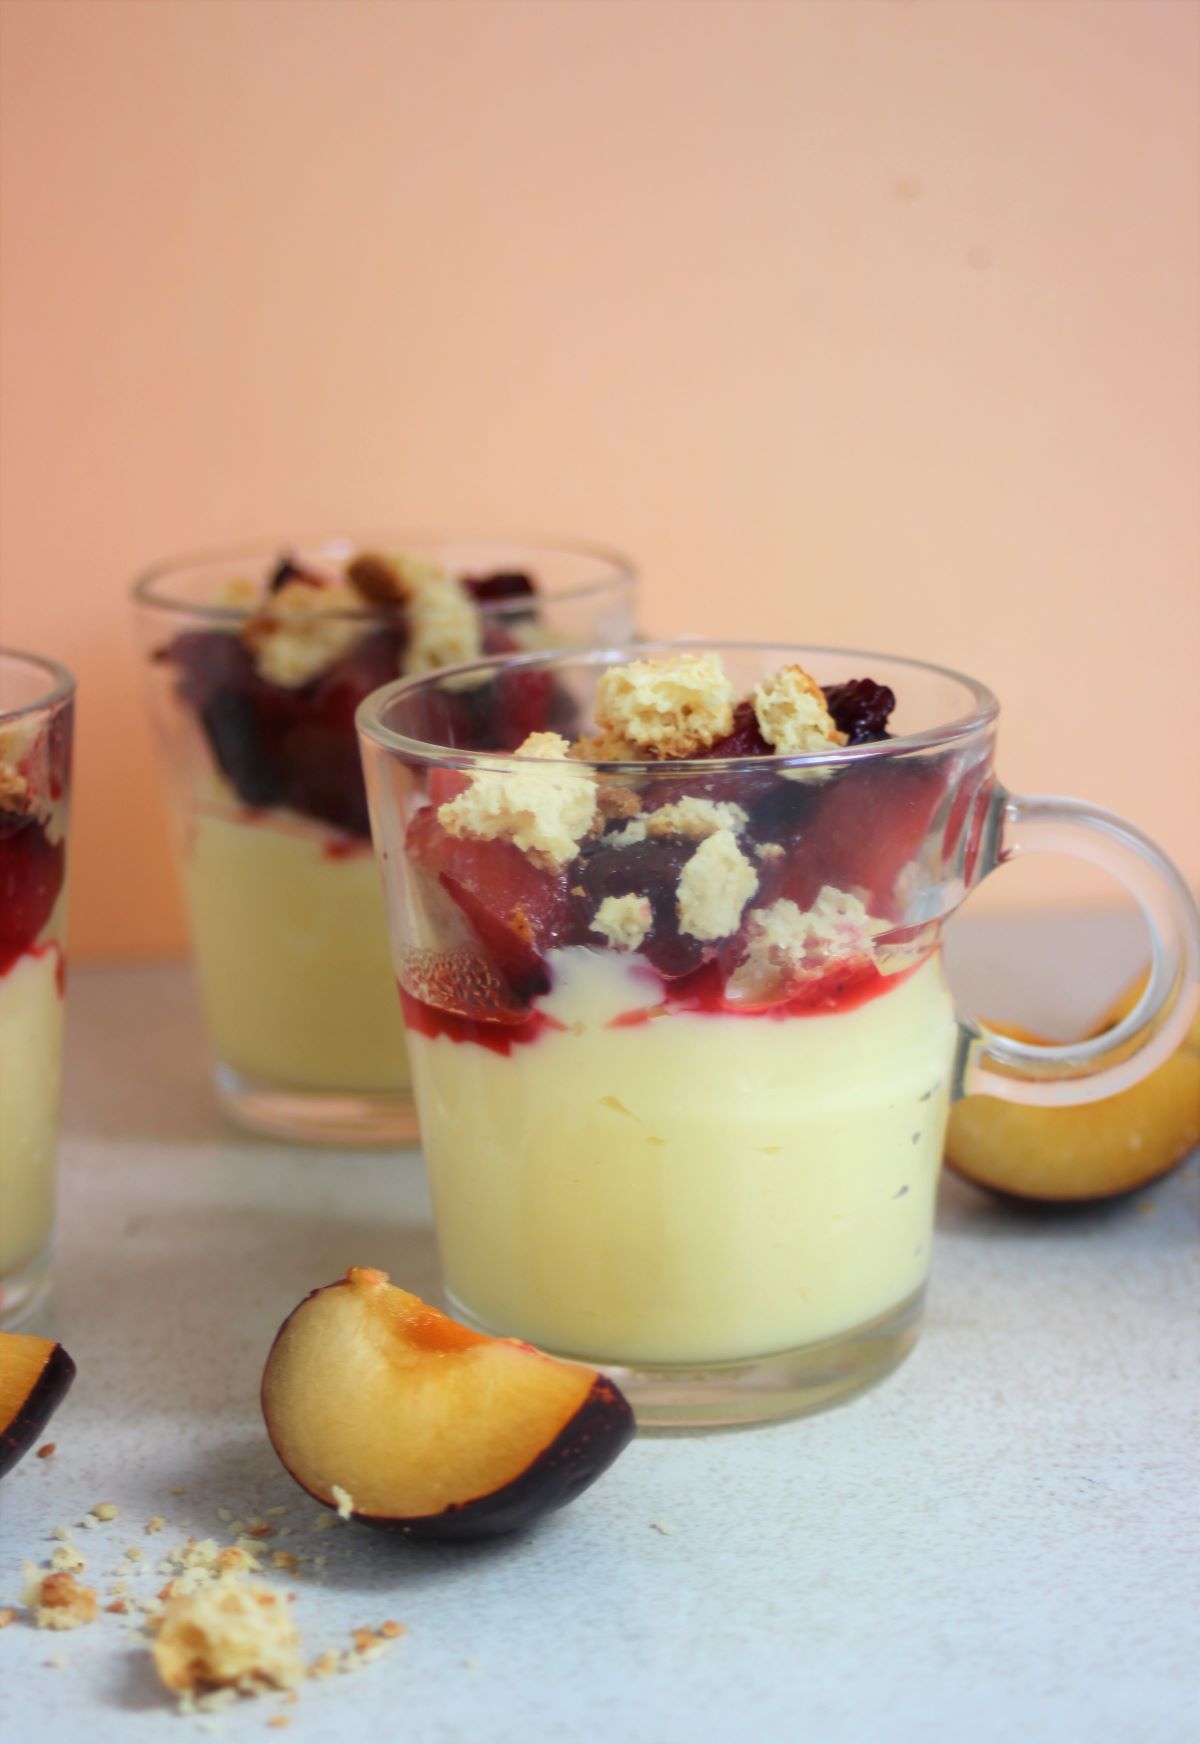 Glass cups with cream, plum compote, and crumbs. Slices of plums on the side.